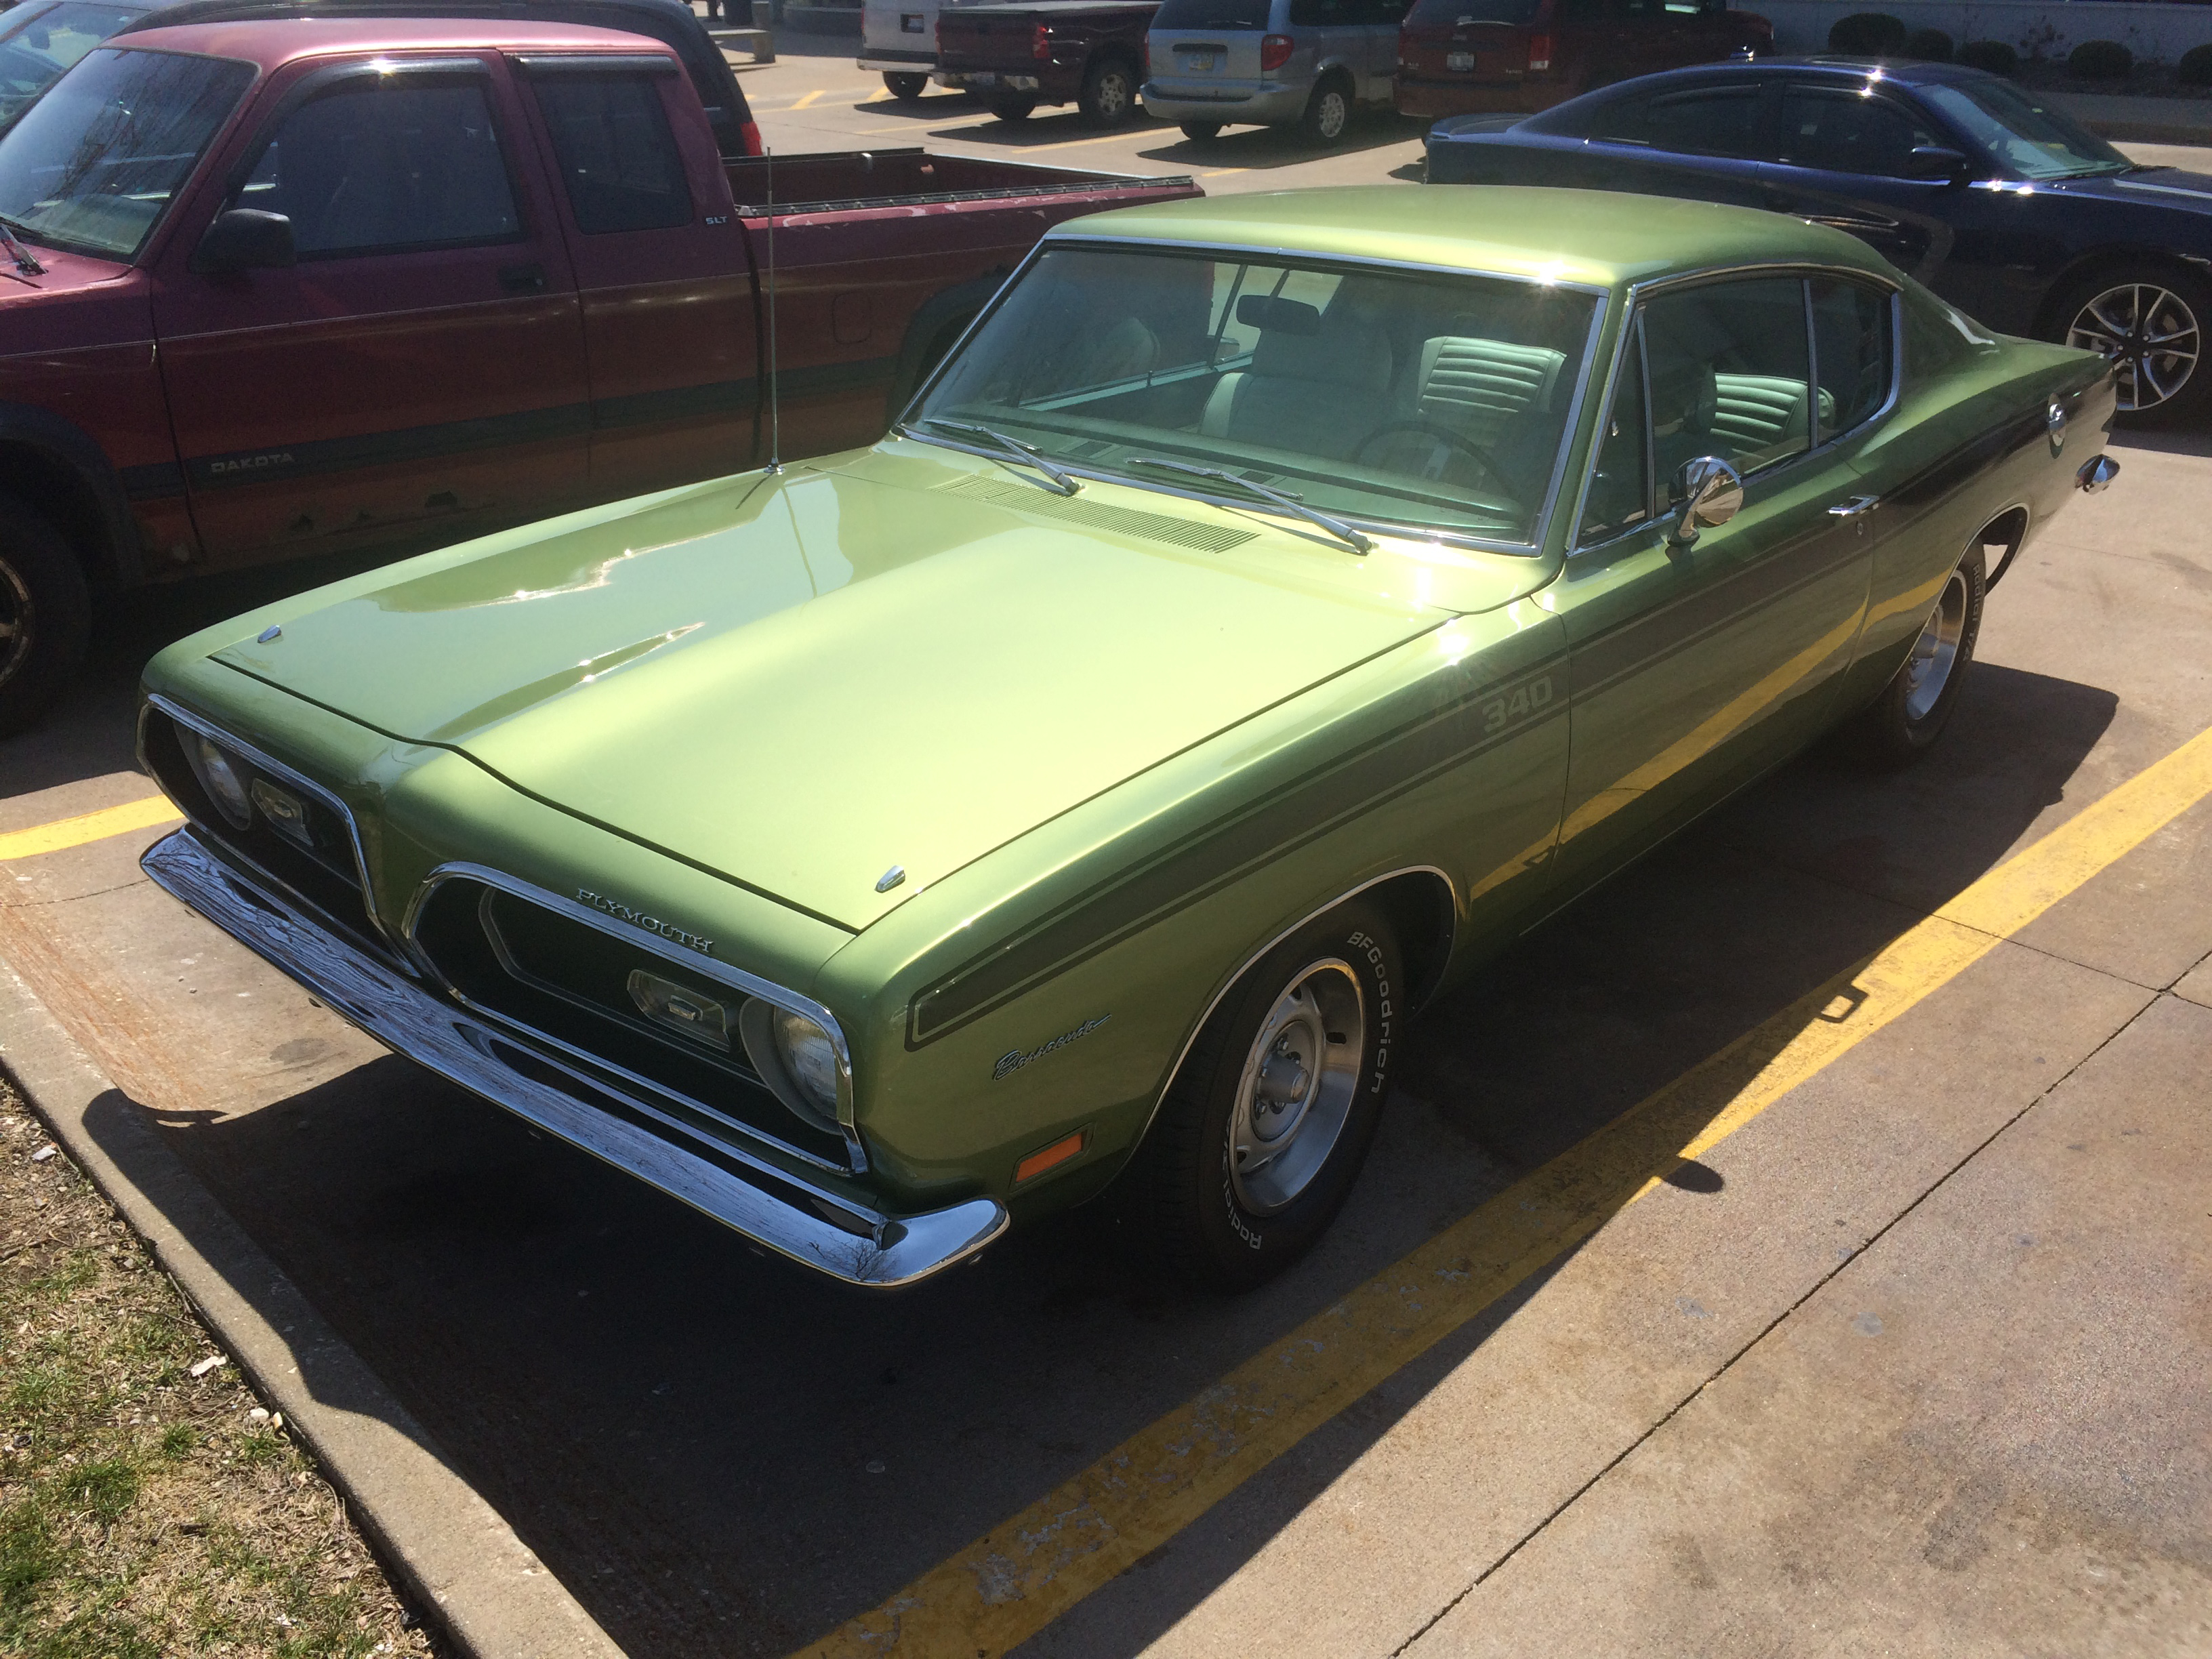 Lot Shots Find of the Week: 1969 Plymouth Barracuda - OnAllCylinders